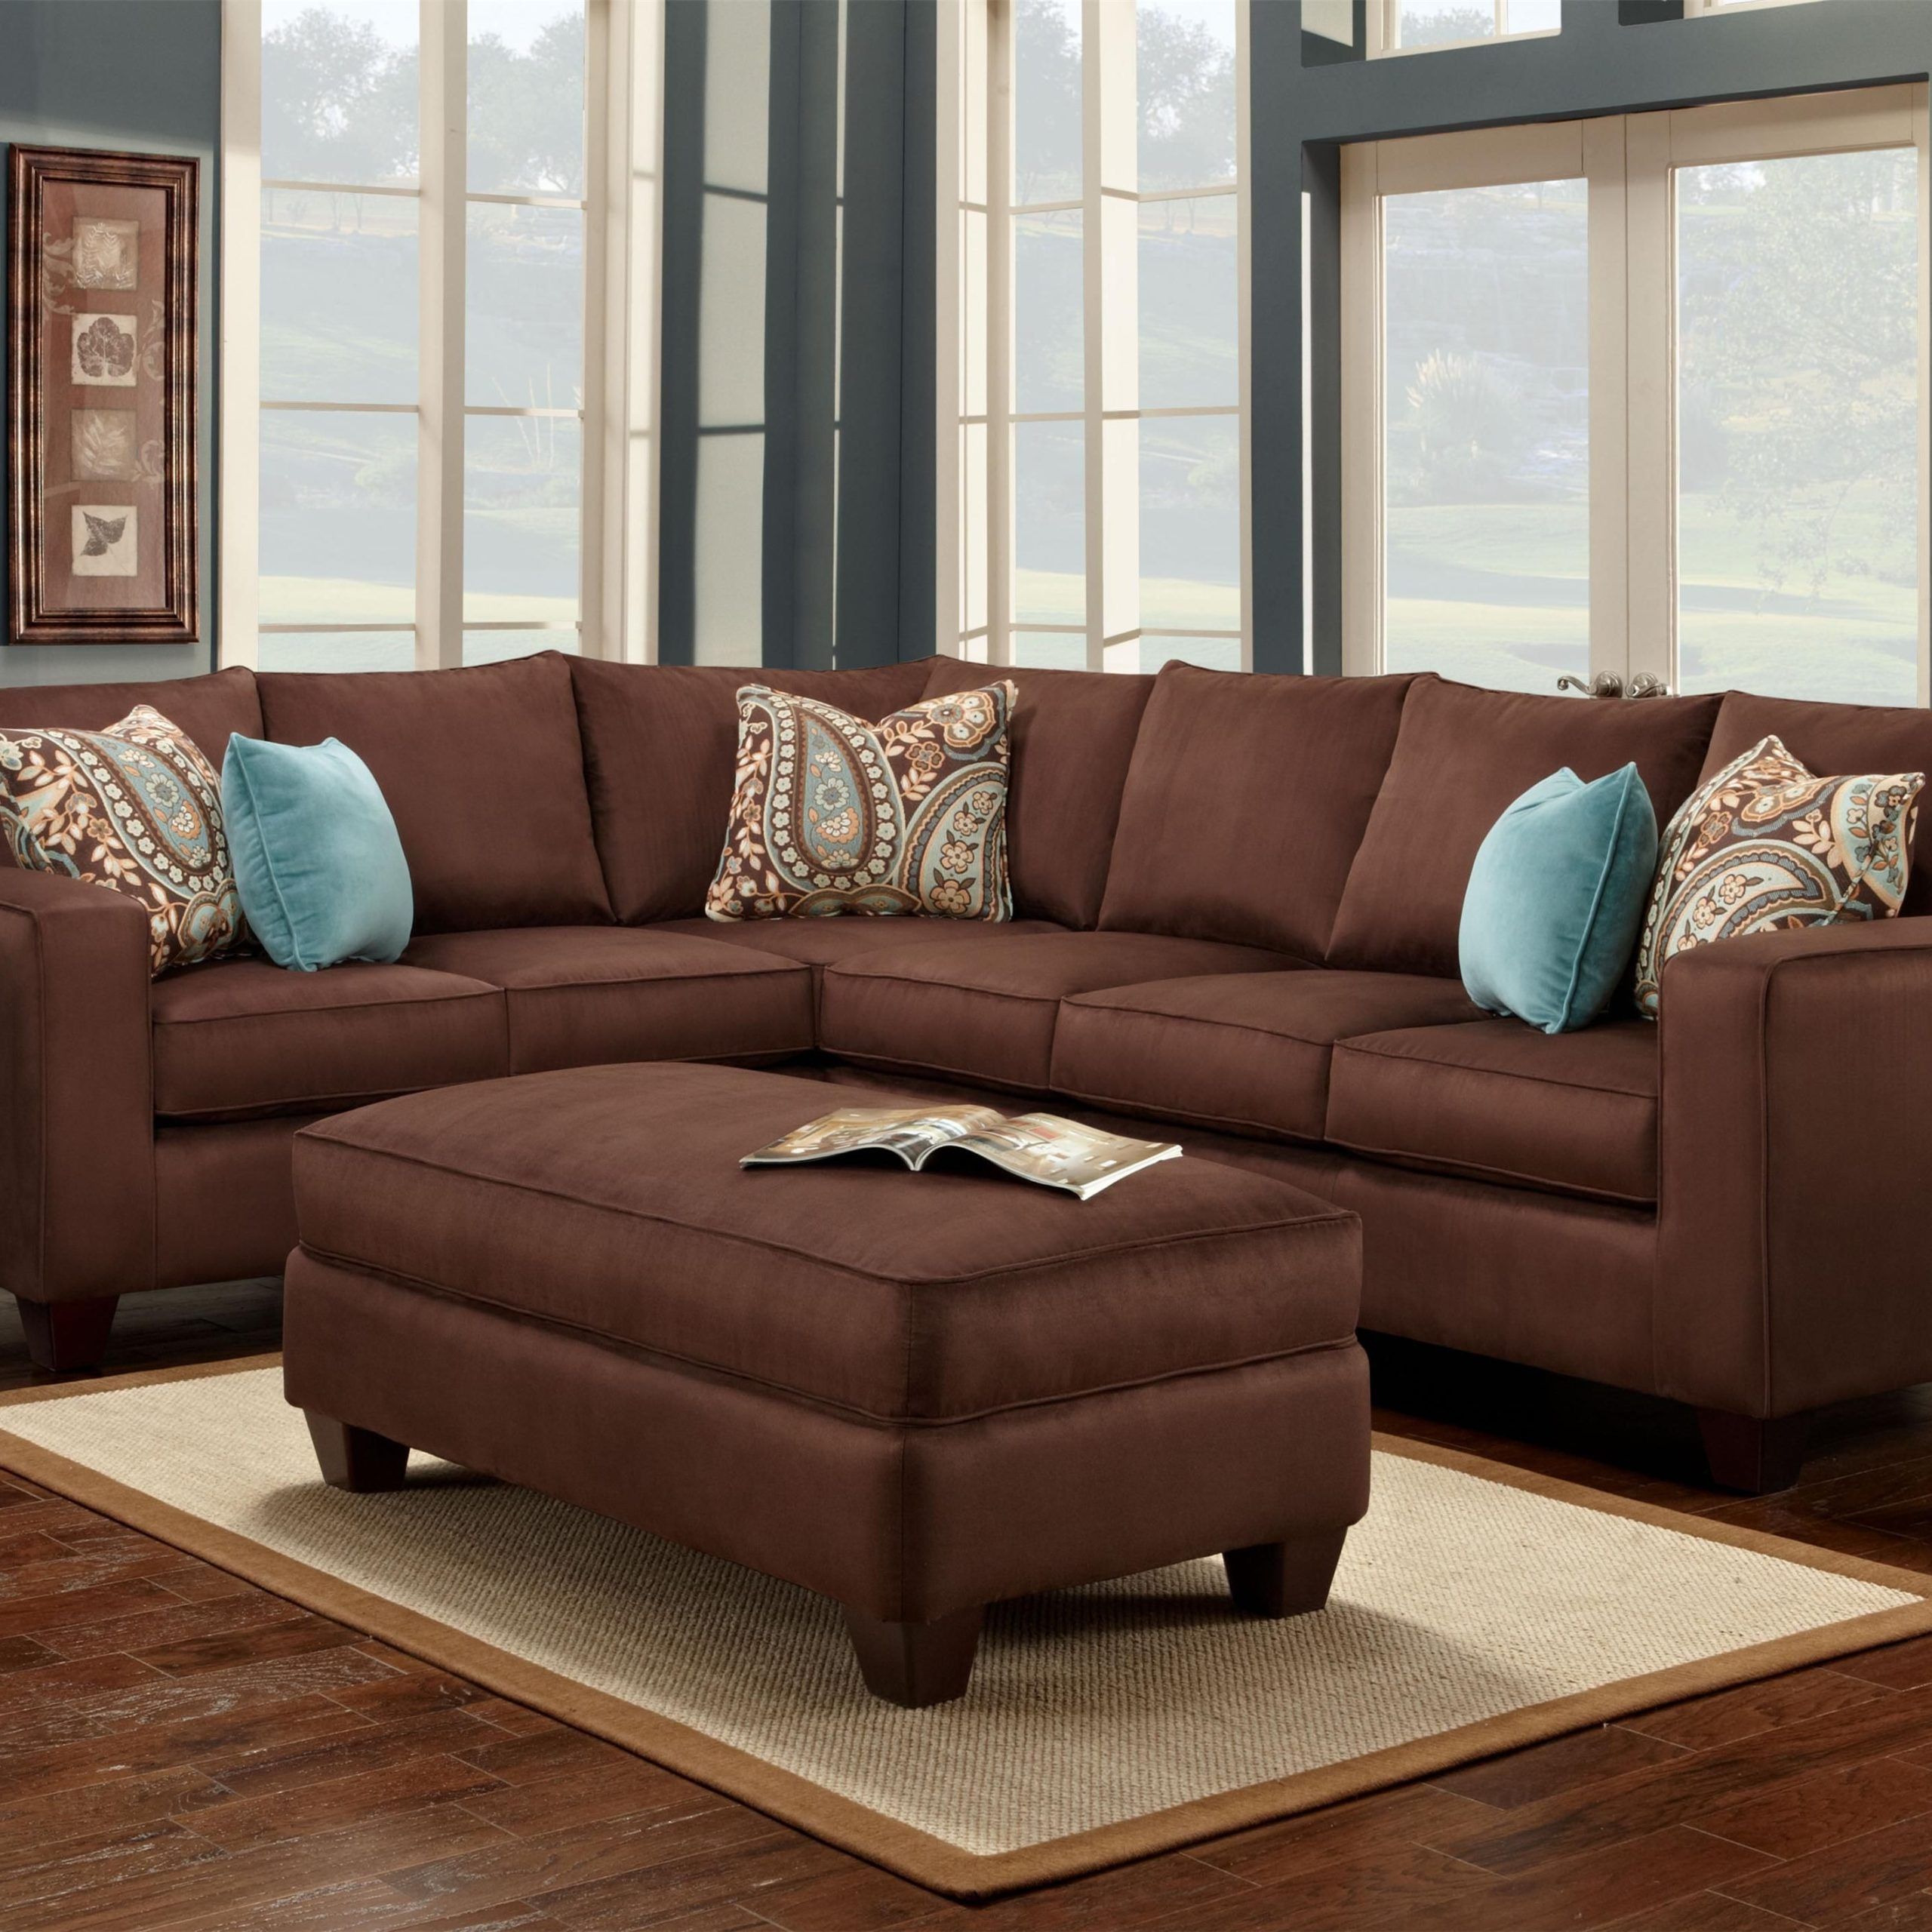 Pindiana Luna On Muebles | Brown Sofa Living Room, Living Room Pertaining To Sofas In Multiple Colors (View 20 of 20)